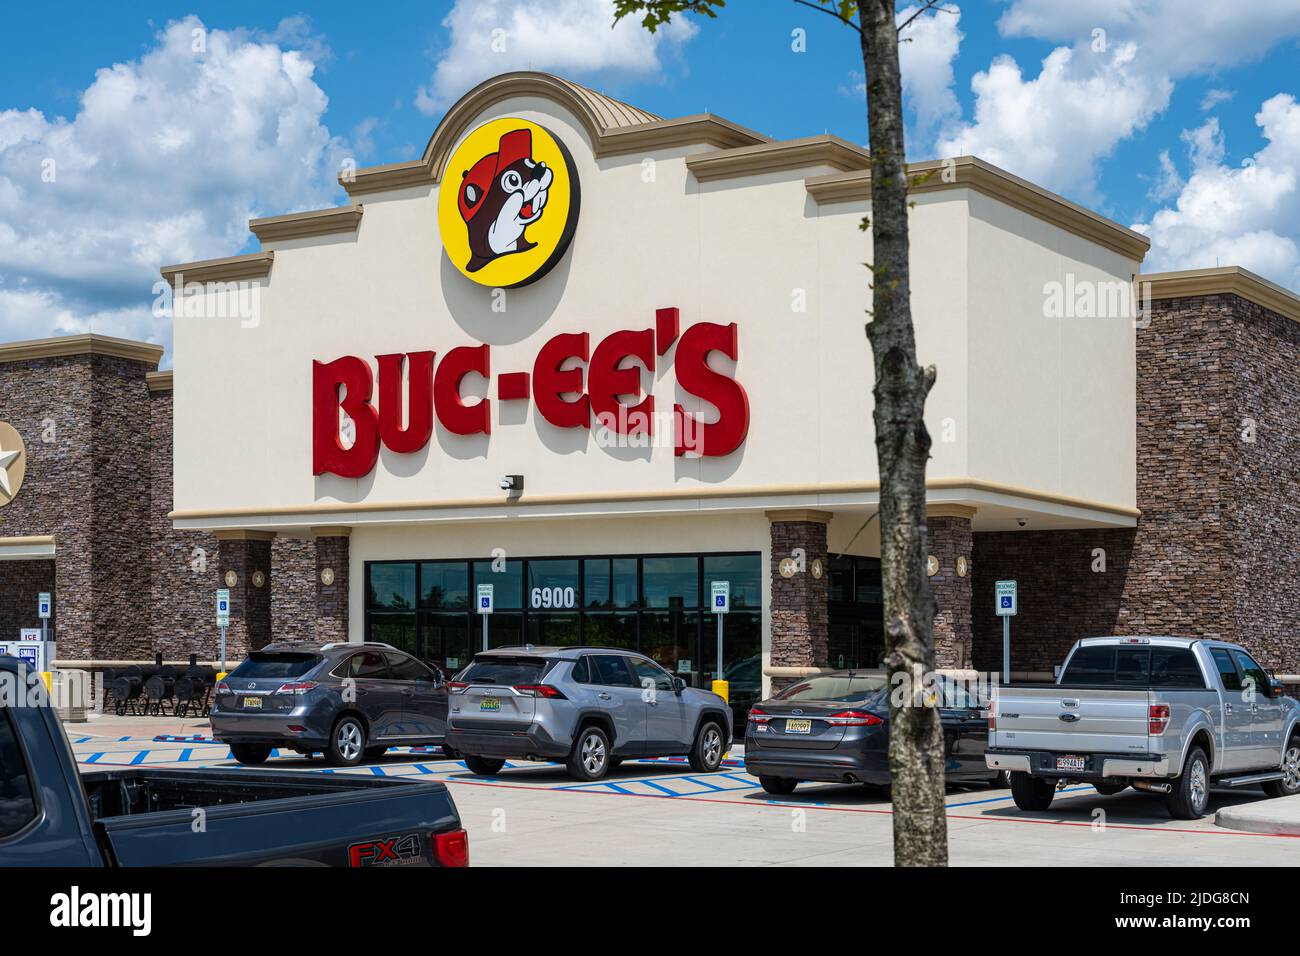 Buc Ees Texas Based And Southern Themed Mega Convenience Store And Gas